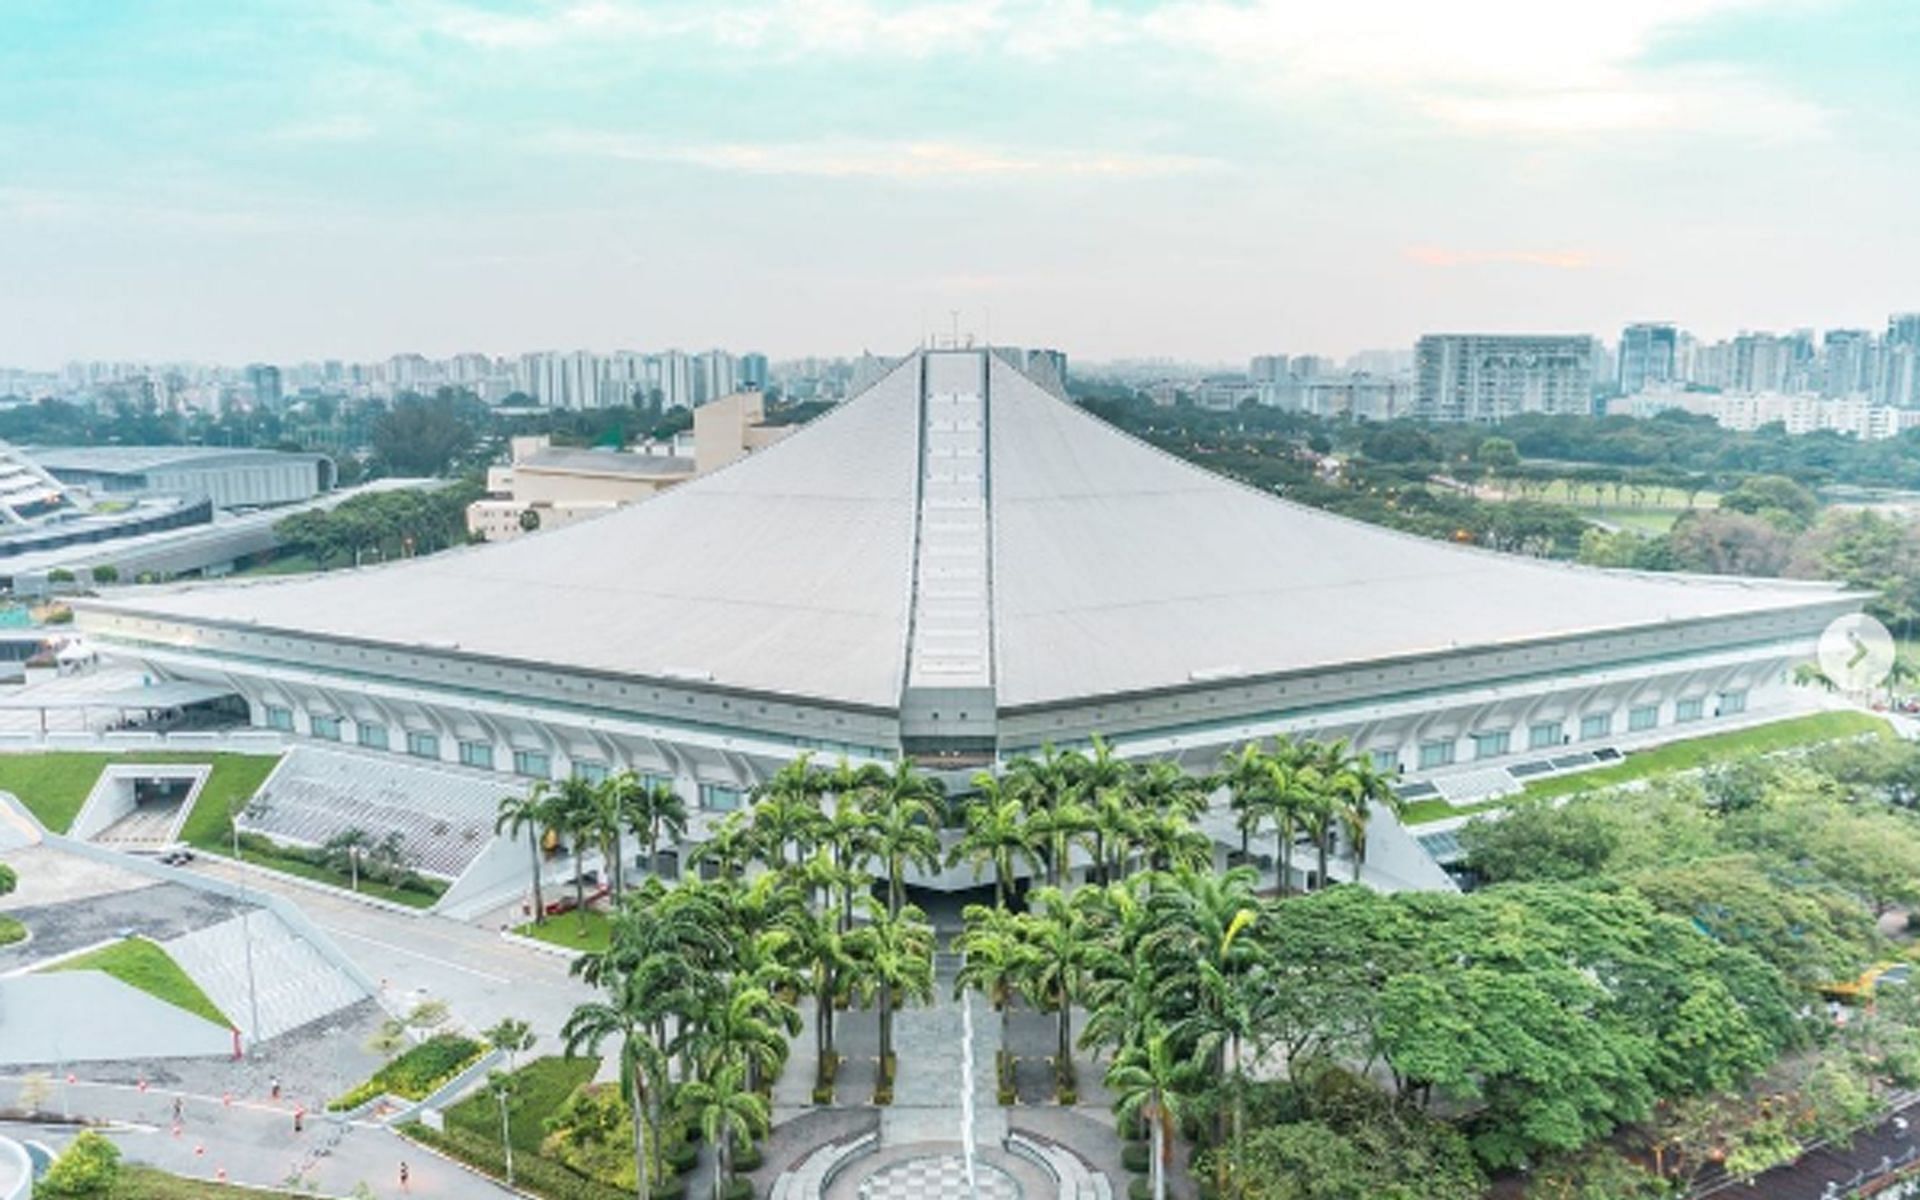 UFC Fight Night: Holloway vs The Korean Zombie will take place at the Singapore Indoor Stadium [Pictured] on August 26 [Image via @sgsportshub Instagram]